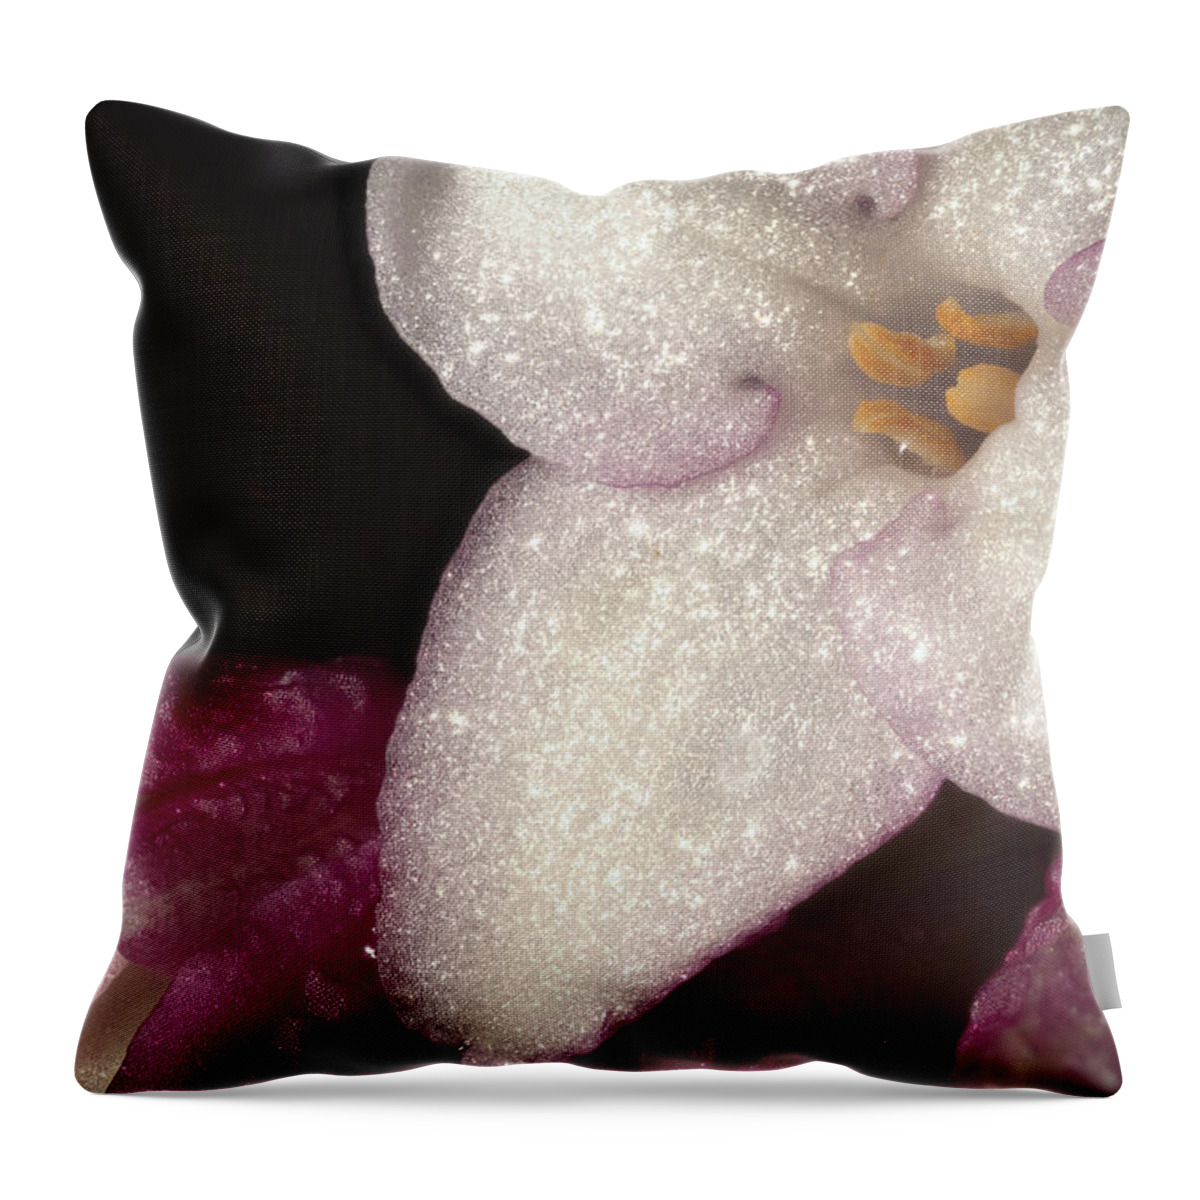 Daphne Odora Throw Pillow featuring the photograph Close up of Daphne Odora by Jean Noren